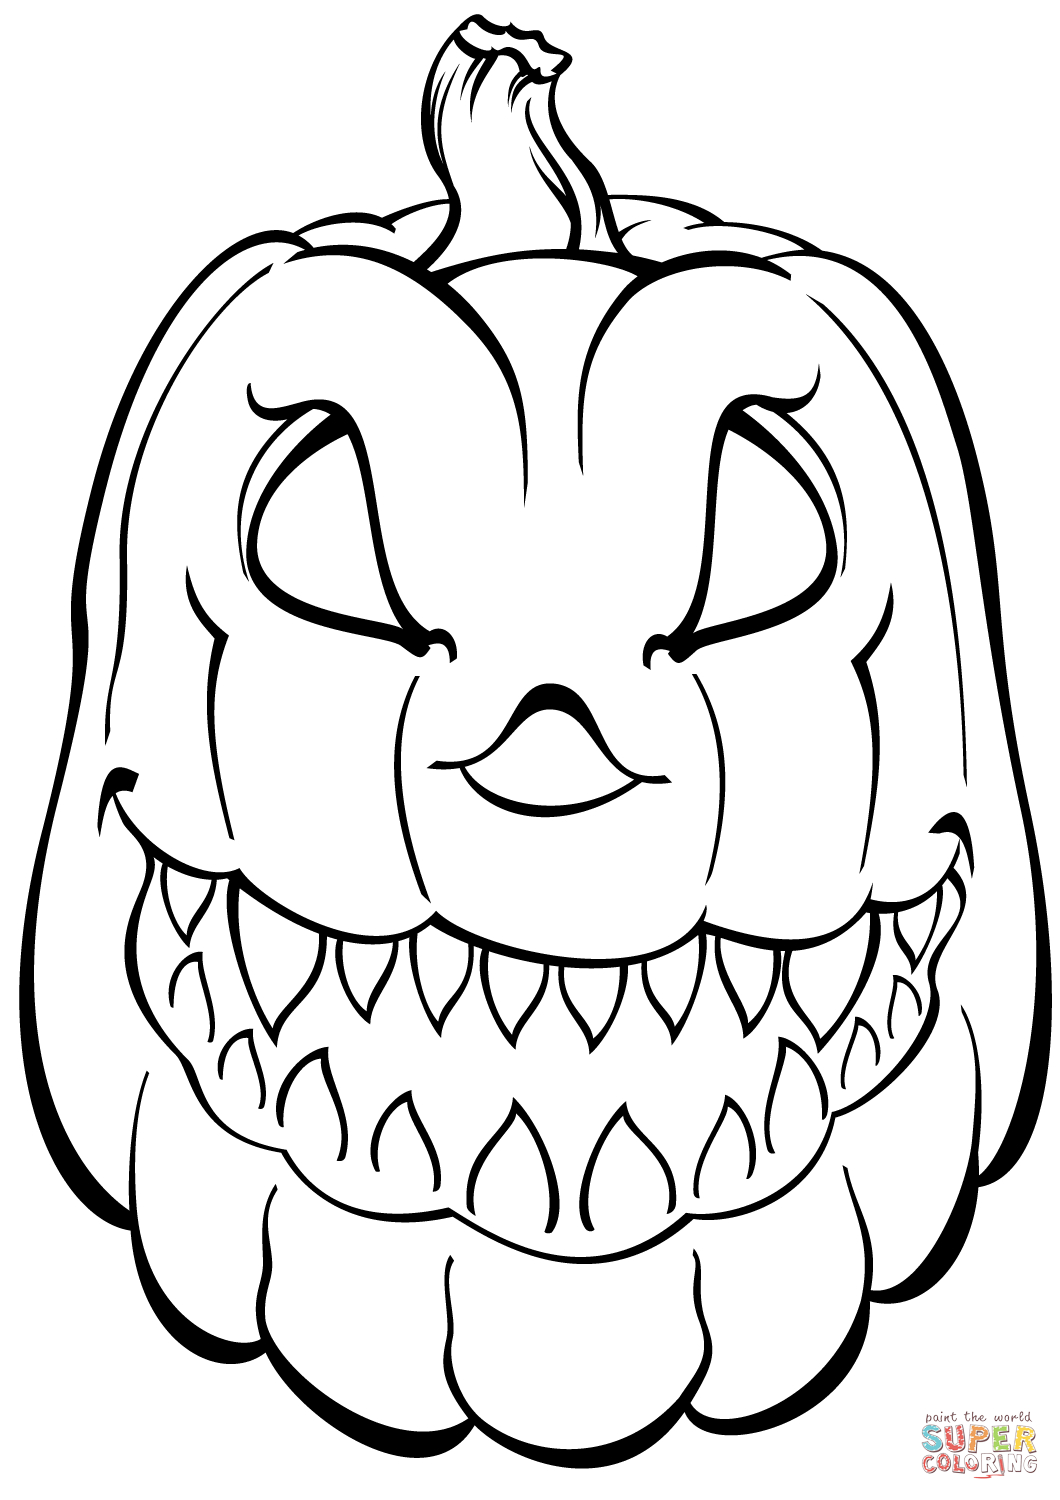 Scary Pumpkin Coloring Page | Free Printable Coloring Pages - Free Printable Pumpkin Coloring Pages